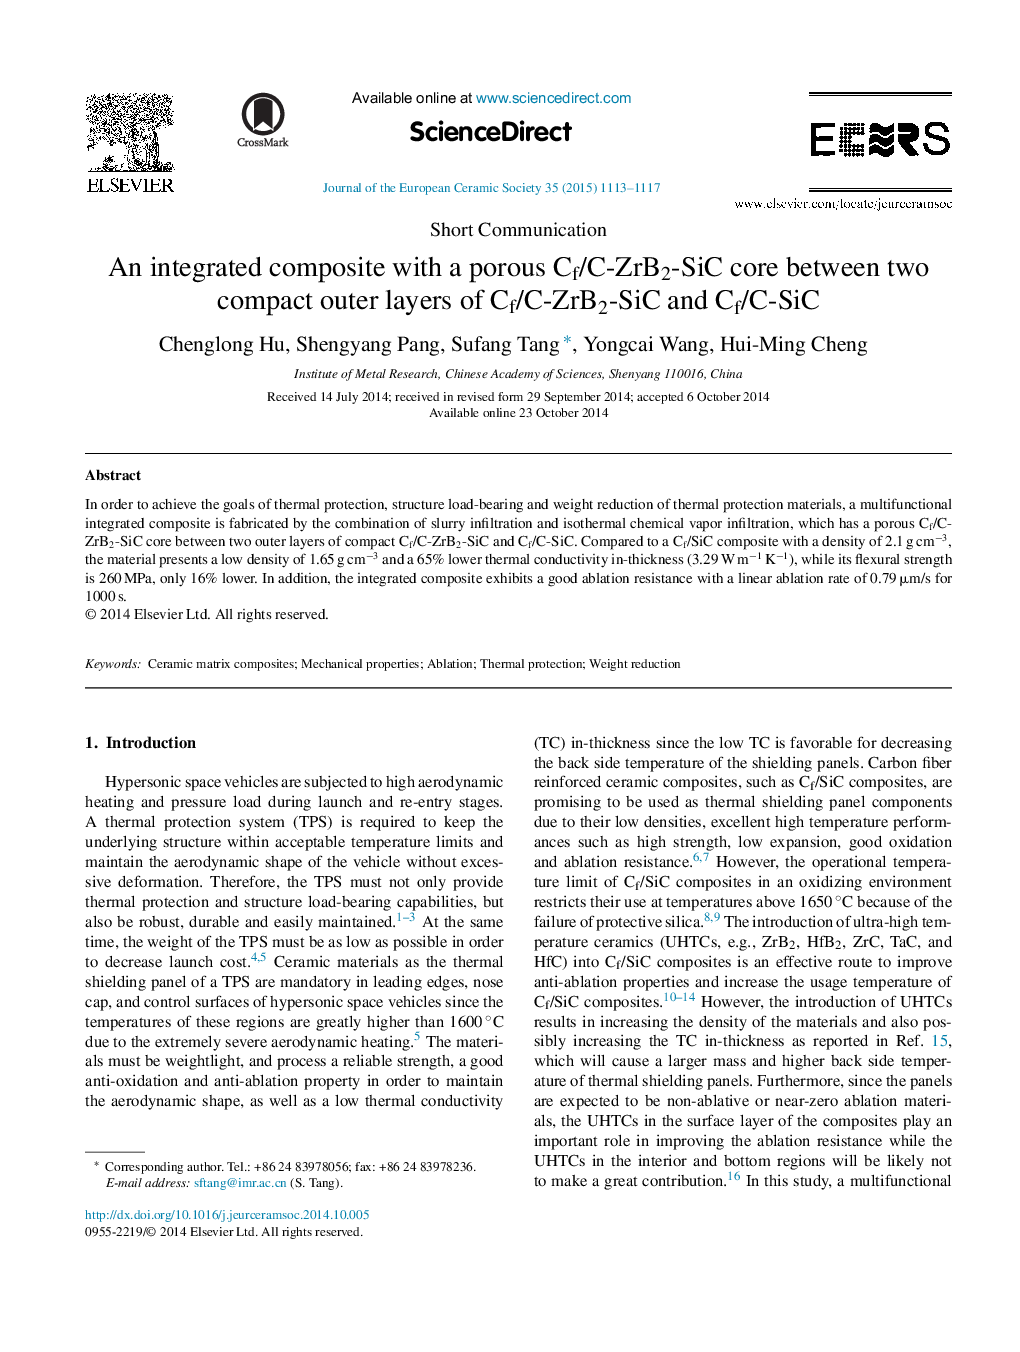 An integrated composite with a porous Cf/C-ZrB2-SiC core between two compact outer layers of Cf/C-ZrB2-SiC and Cf/C-SiC